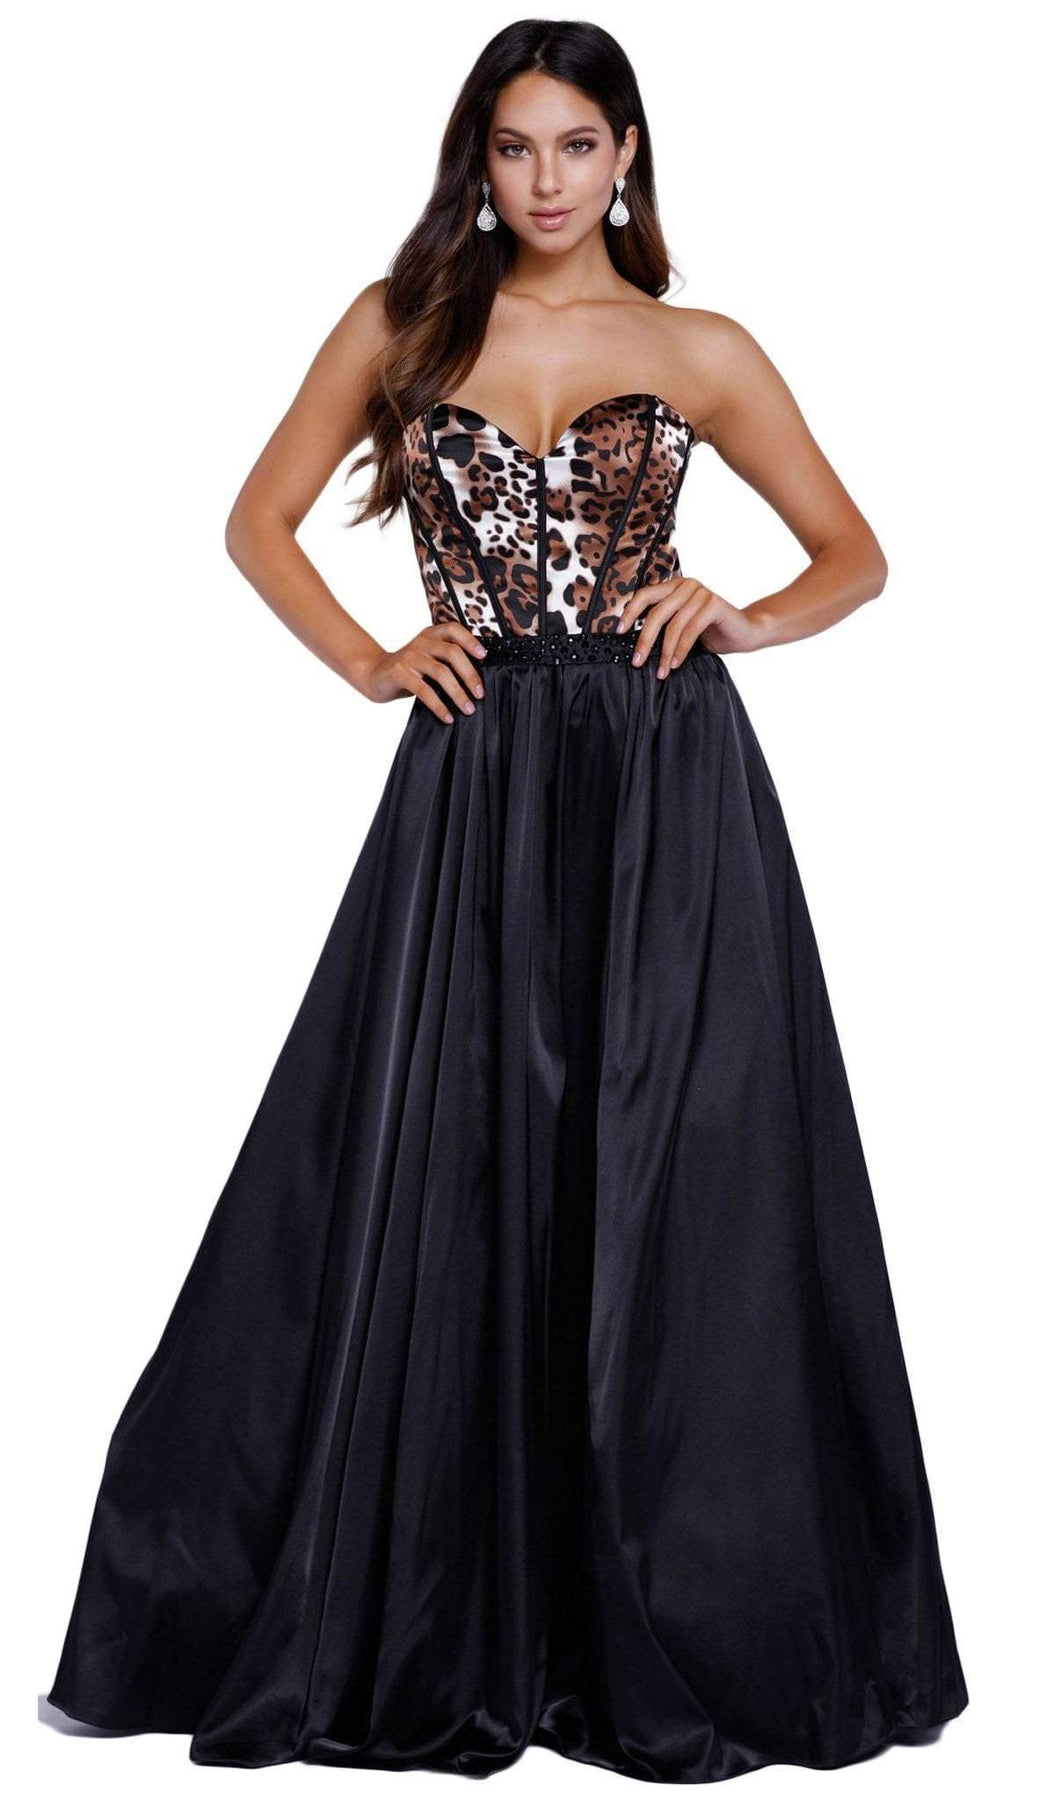 Nox Anabel - 8230 Corset Boned Leopard Print Evening Gown Special Occasion Dress XS / Leopard Printed